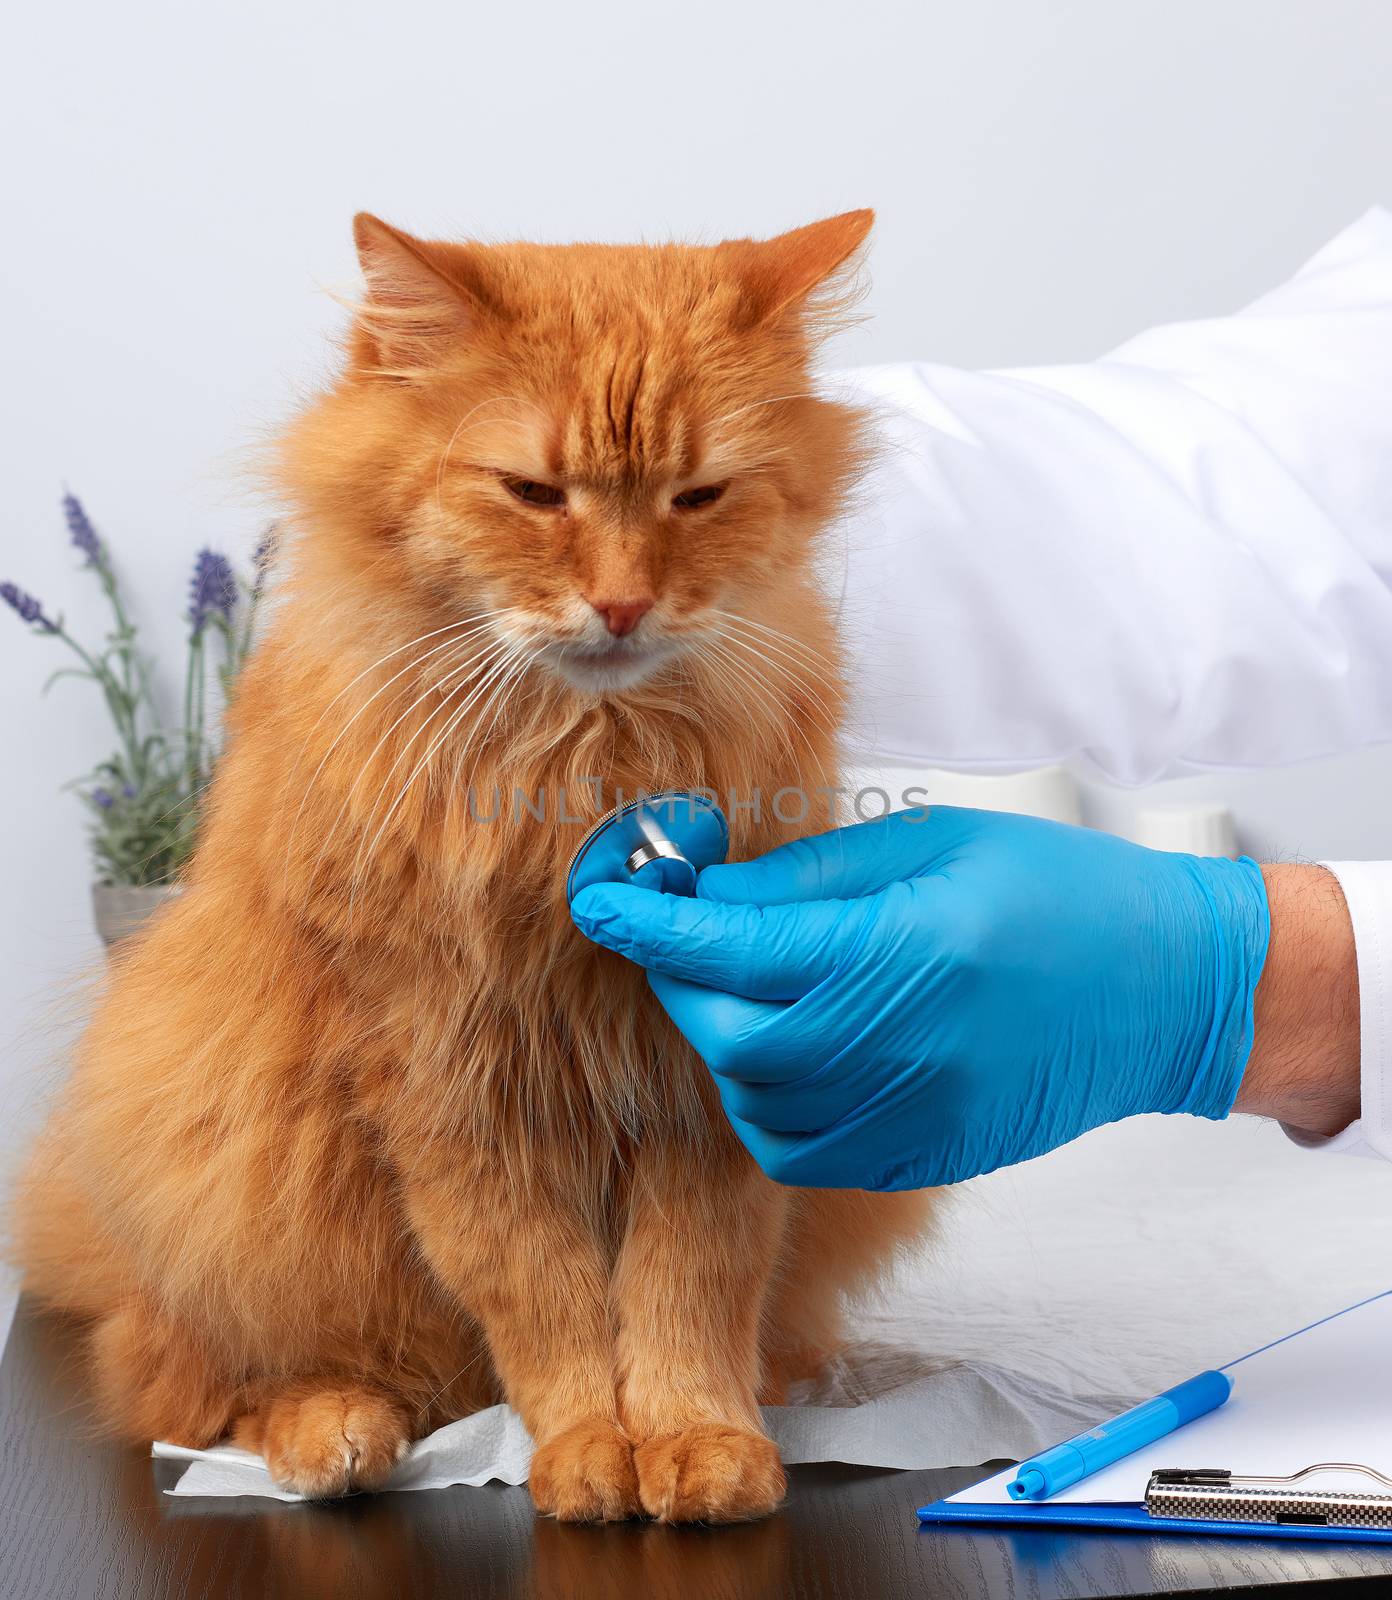 veterinarian man in a white medical coat and blue sterile gloves sits at a table and examines an adult fluffy red cat, vet workplace, white background